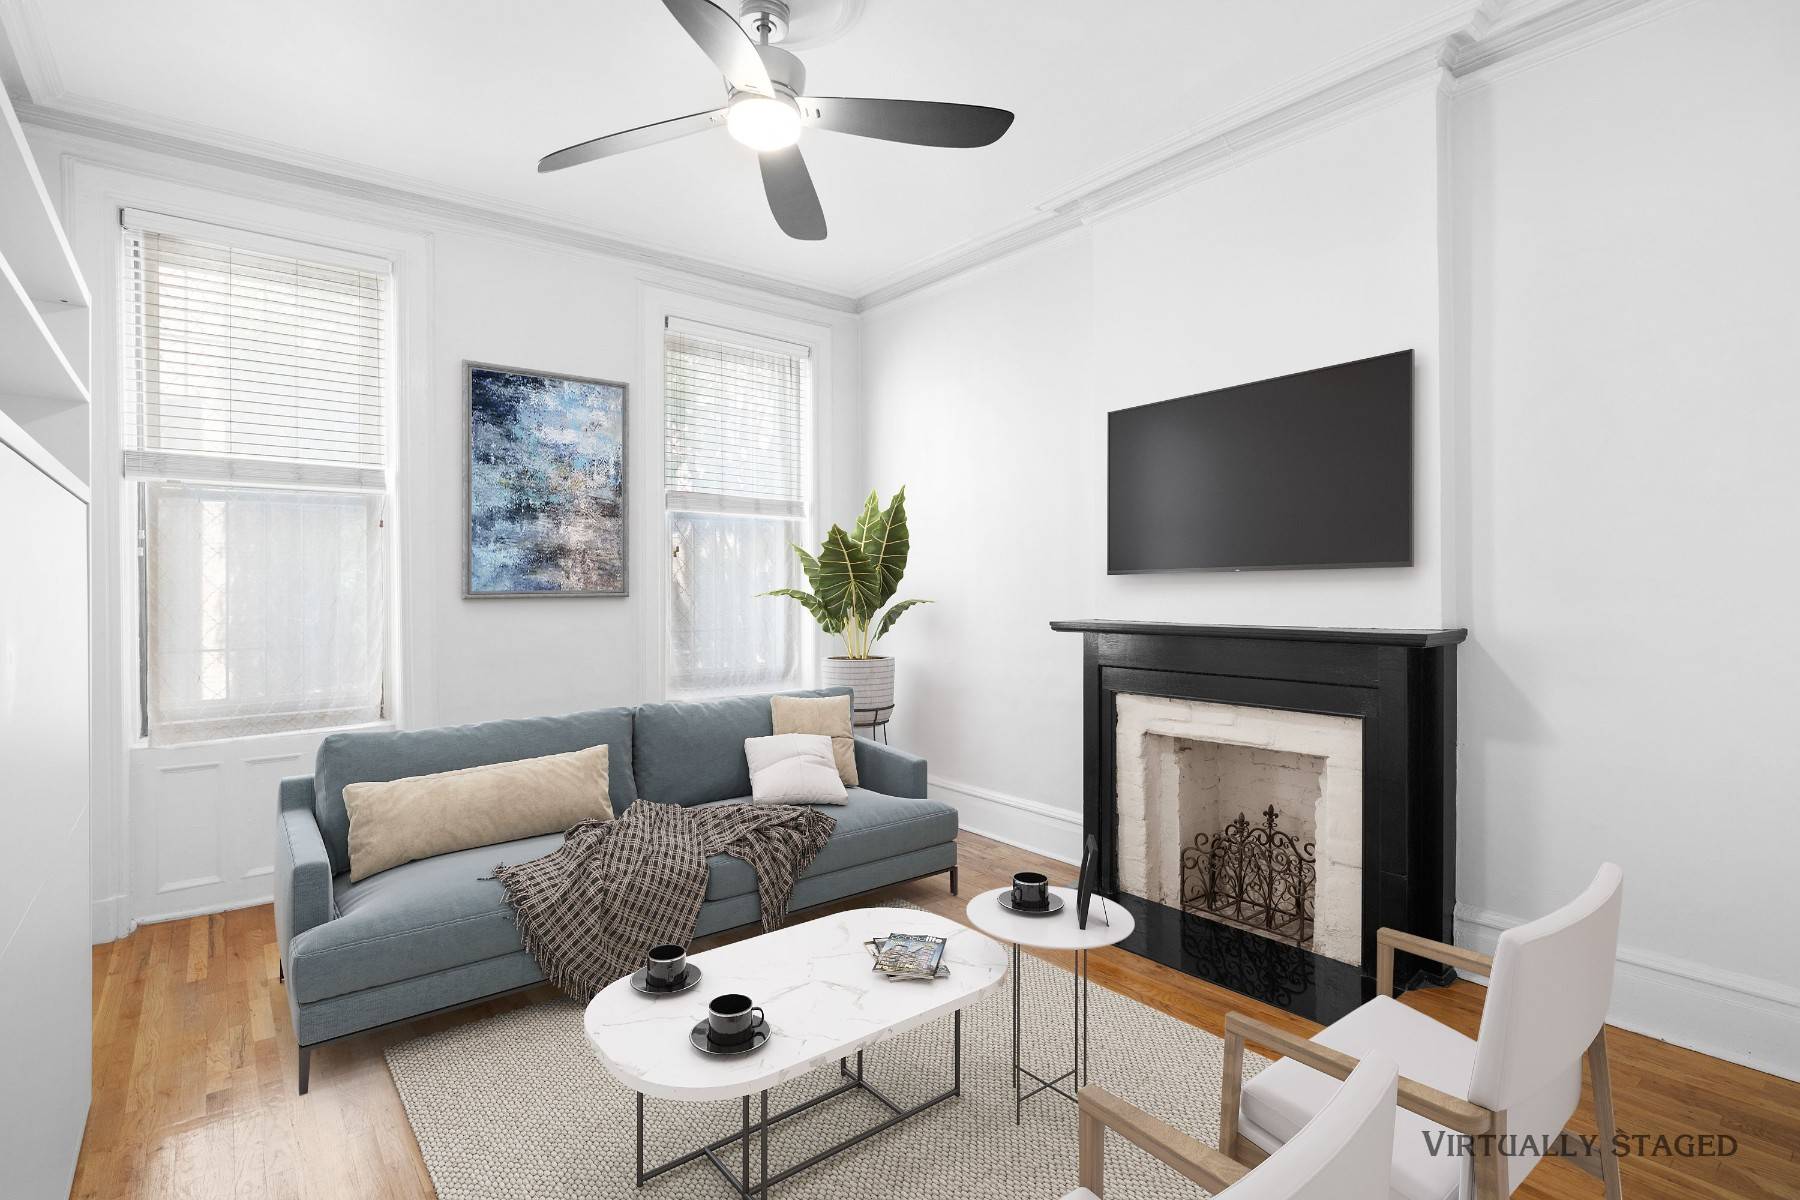 Located at 397 Flatbush Avenue, on the border of Prospect Heights and Park Slope, is a very spacious and move in ready condominium, unit 2R.